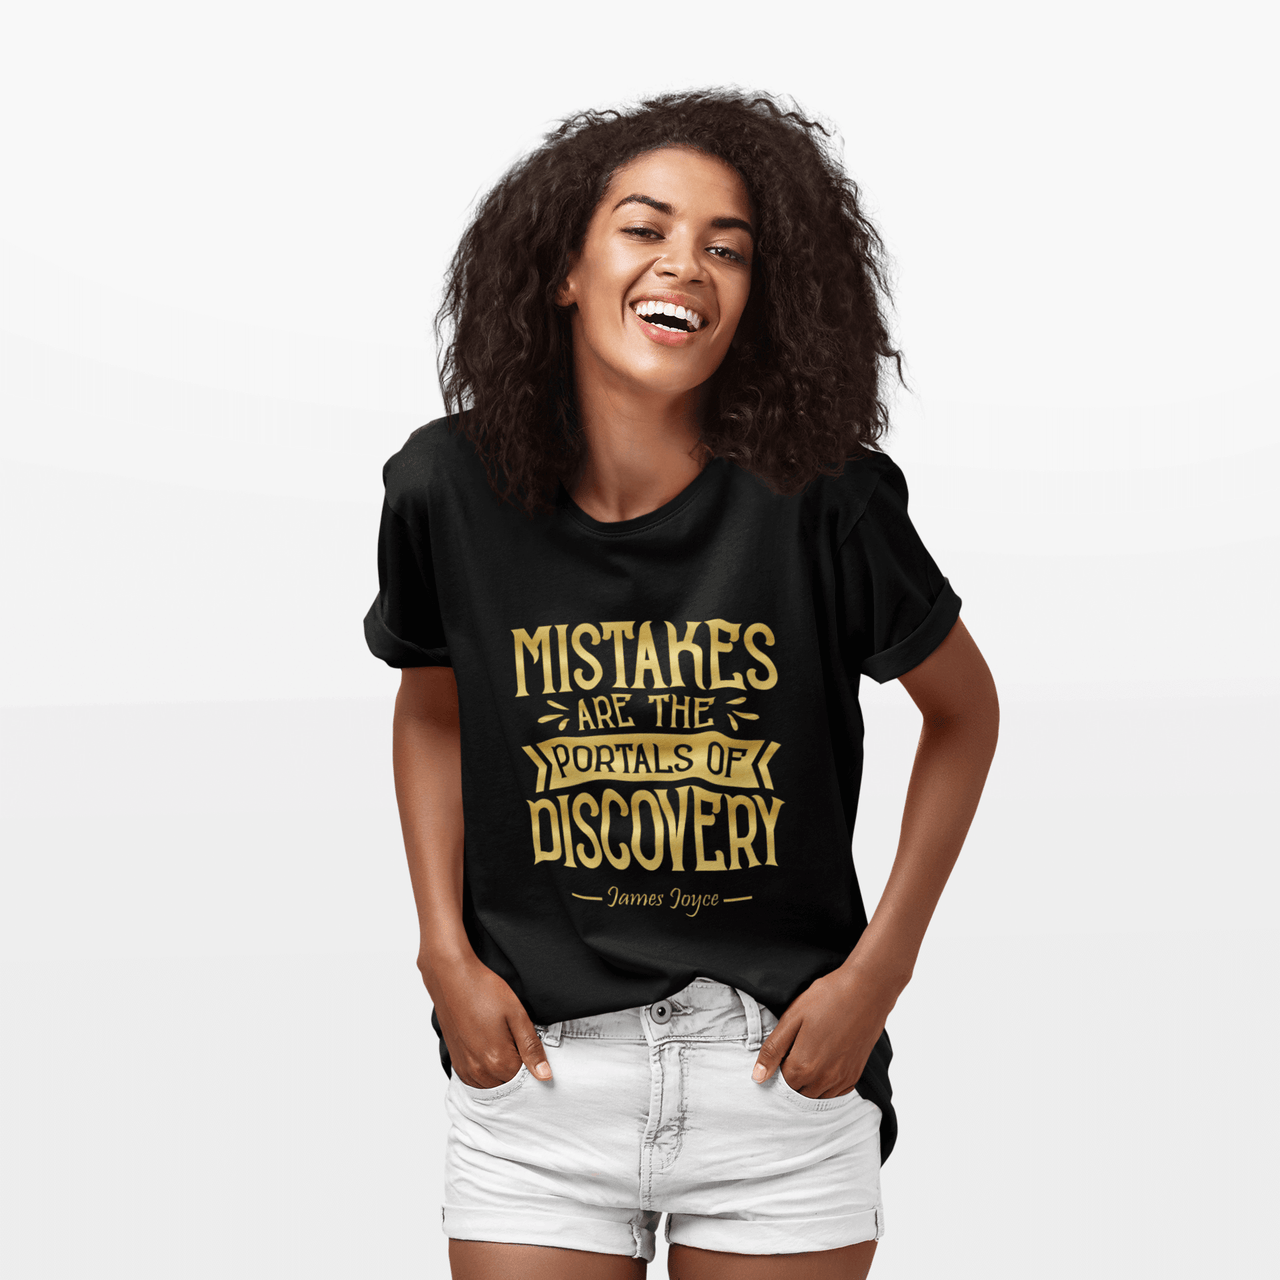 Portals of Discovery - James Joyce Quote - Women's Vintage Tee